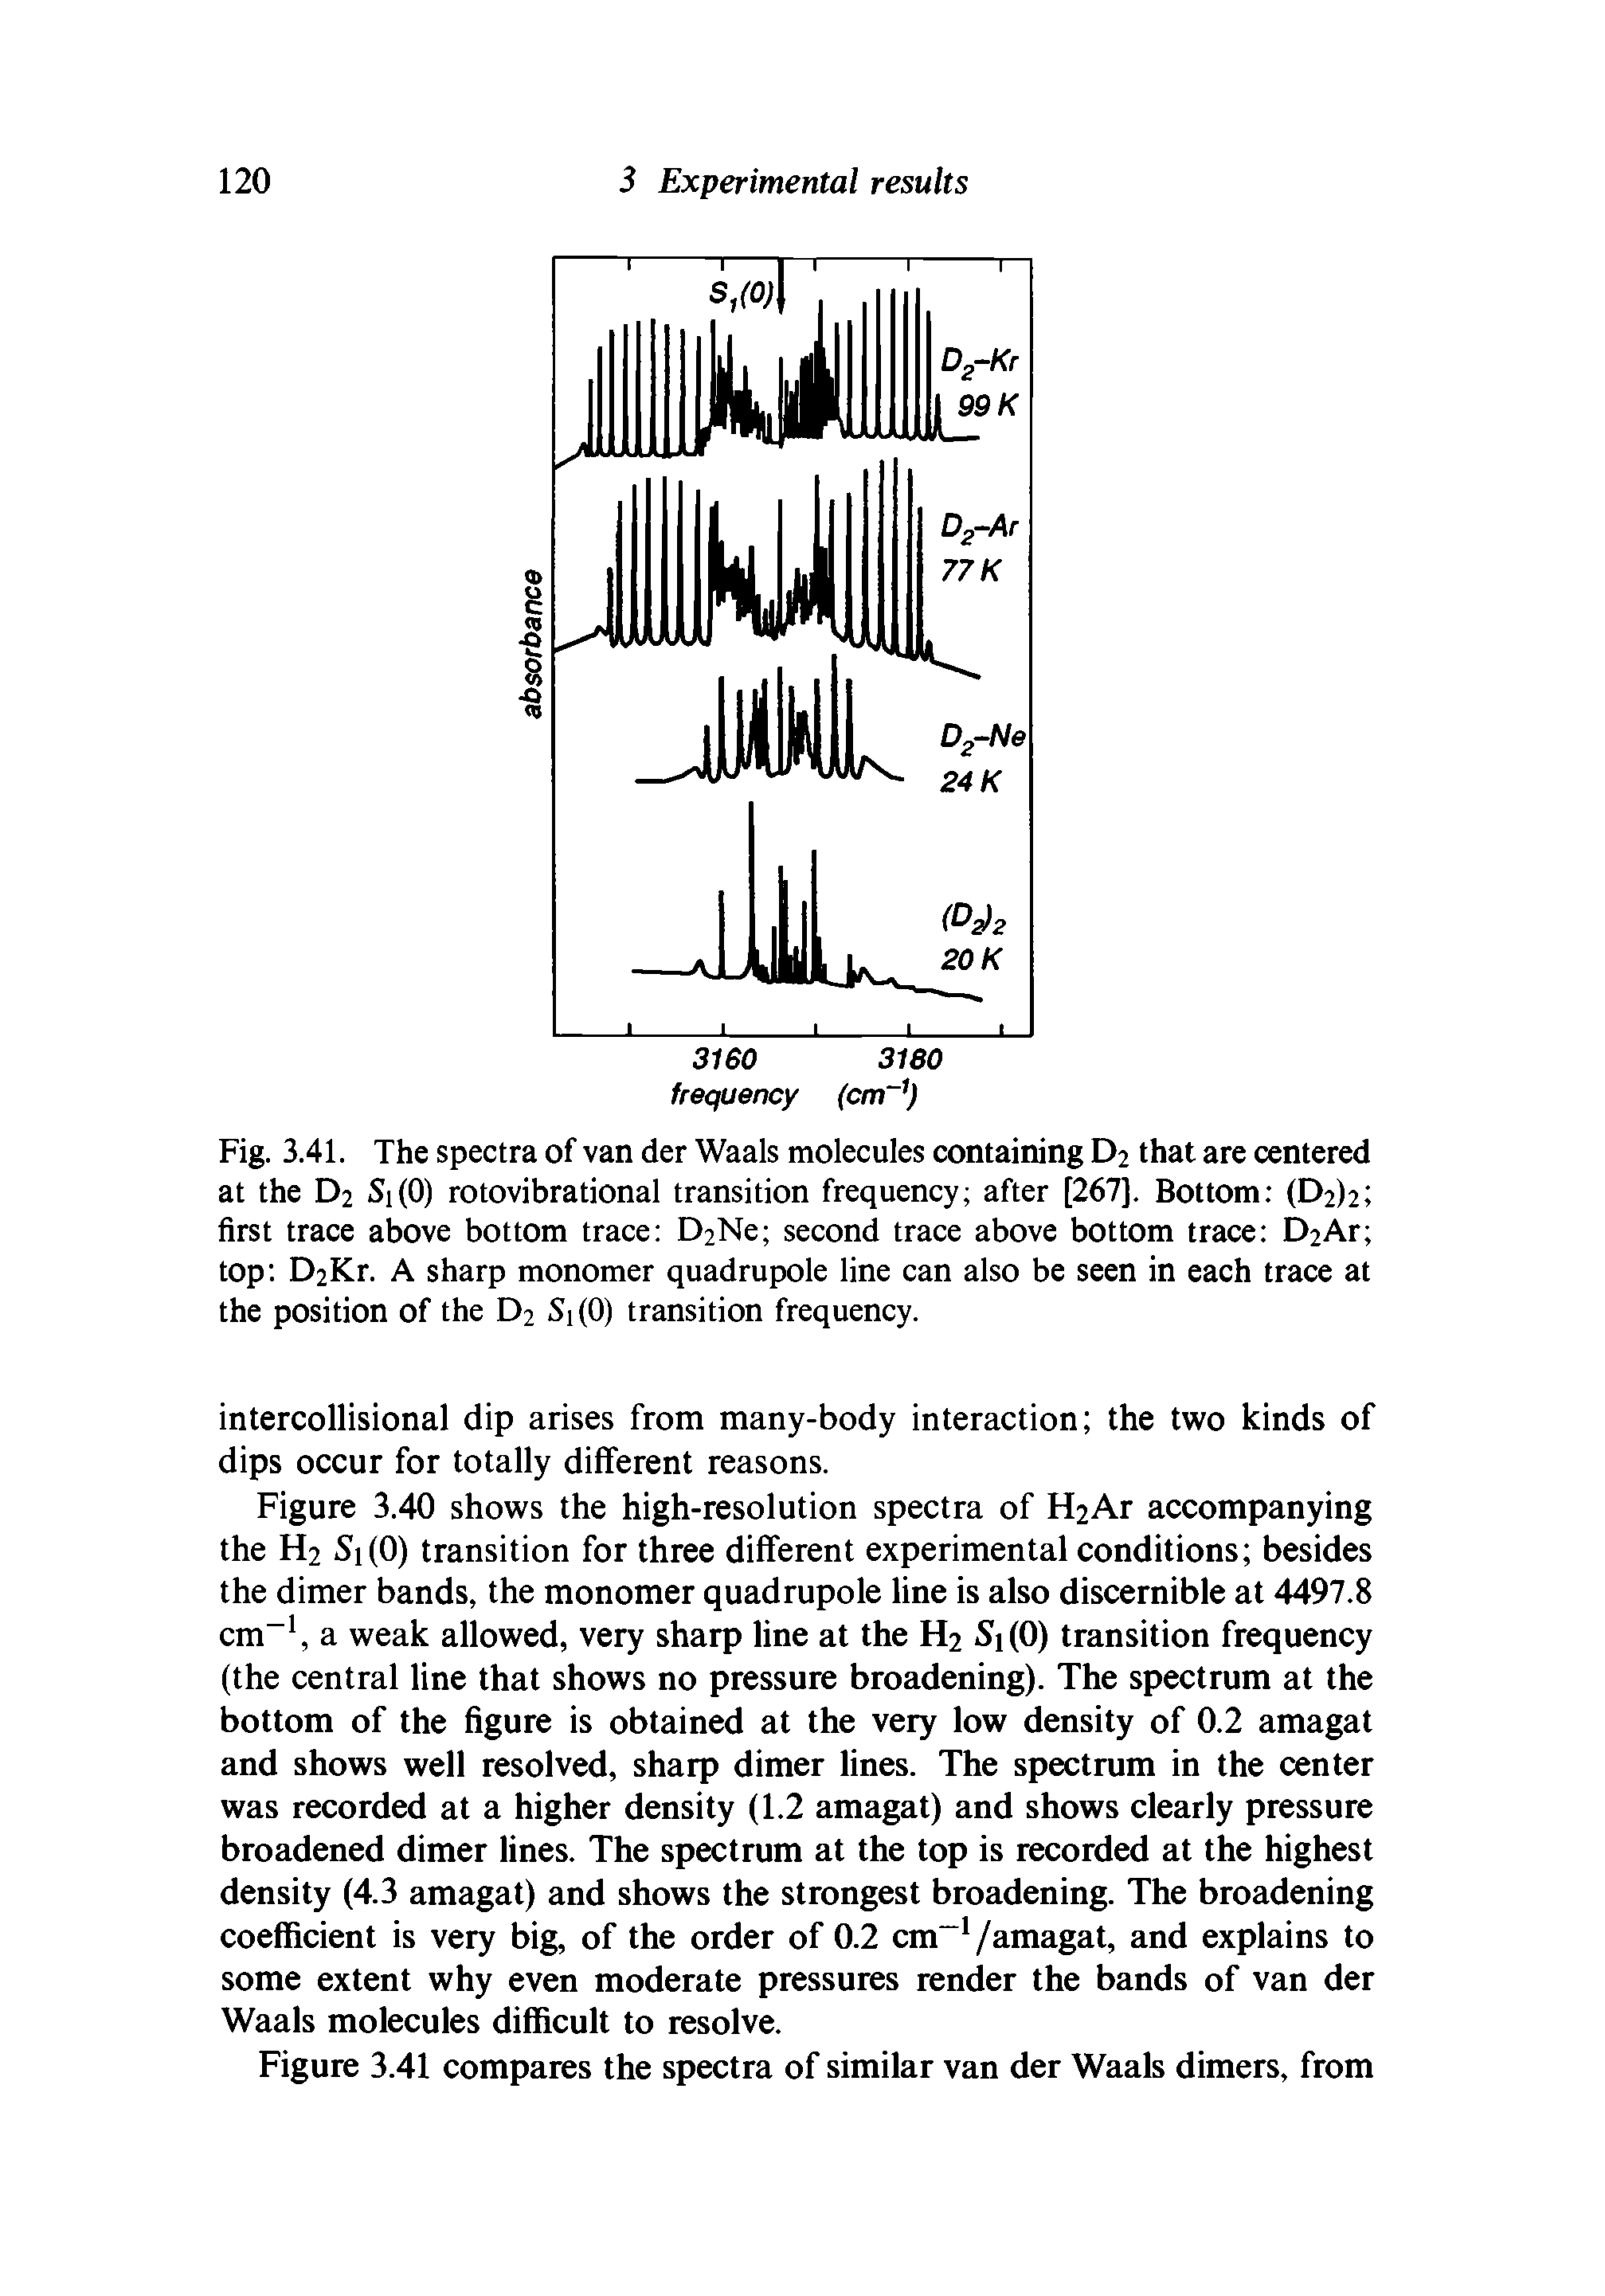 Fig. 3.41. The spectra of van der Waals molecules containing D2 that are centered at the D2 Si(0) rotovibrational transition frequency after [267], Bottom (D2>2 first trace above bottom trace D2Ne second trace above bottom trace D2Ar top D2Kr. A sharp monomer quadrupole line can also be seen in each trace at the position of the D2 Si(0) transition frequency.